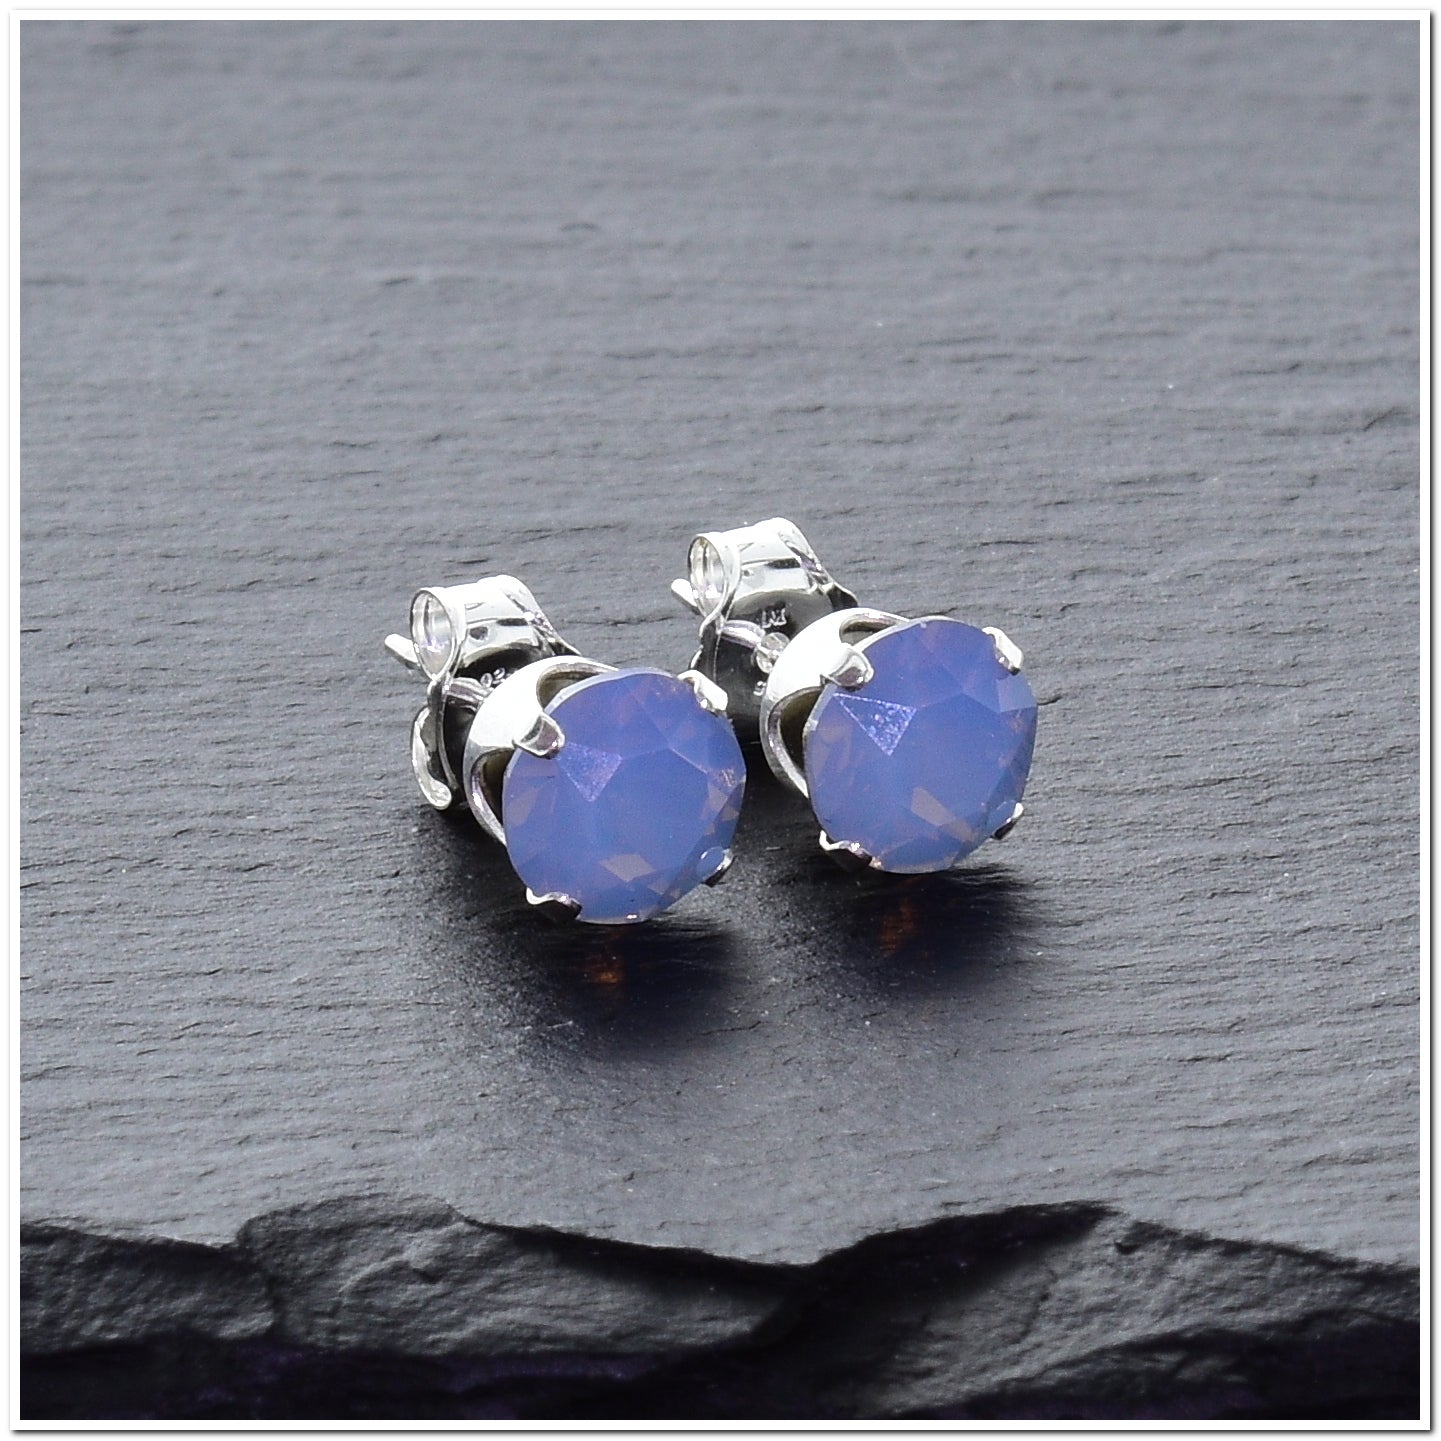 pewterhooter® Women's Classic Collection 925 Sterling silver earrings with sparkling Air Blue Opal crystals, packaged in a gift box for any occasion.